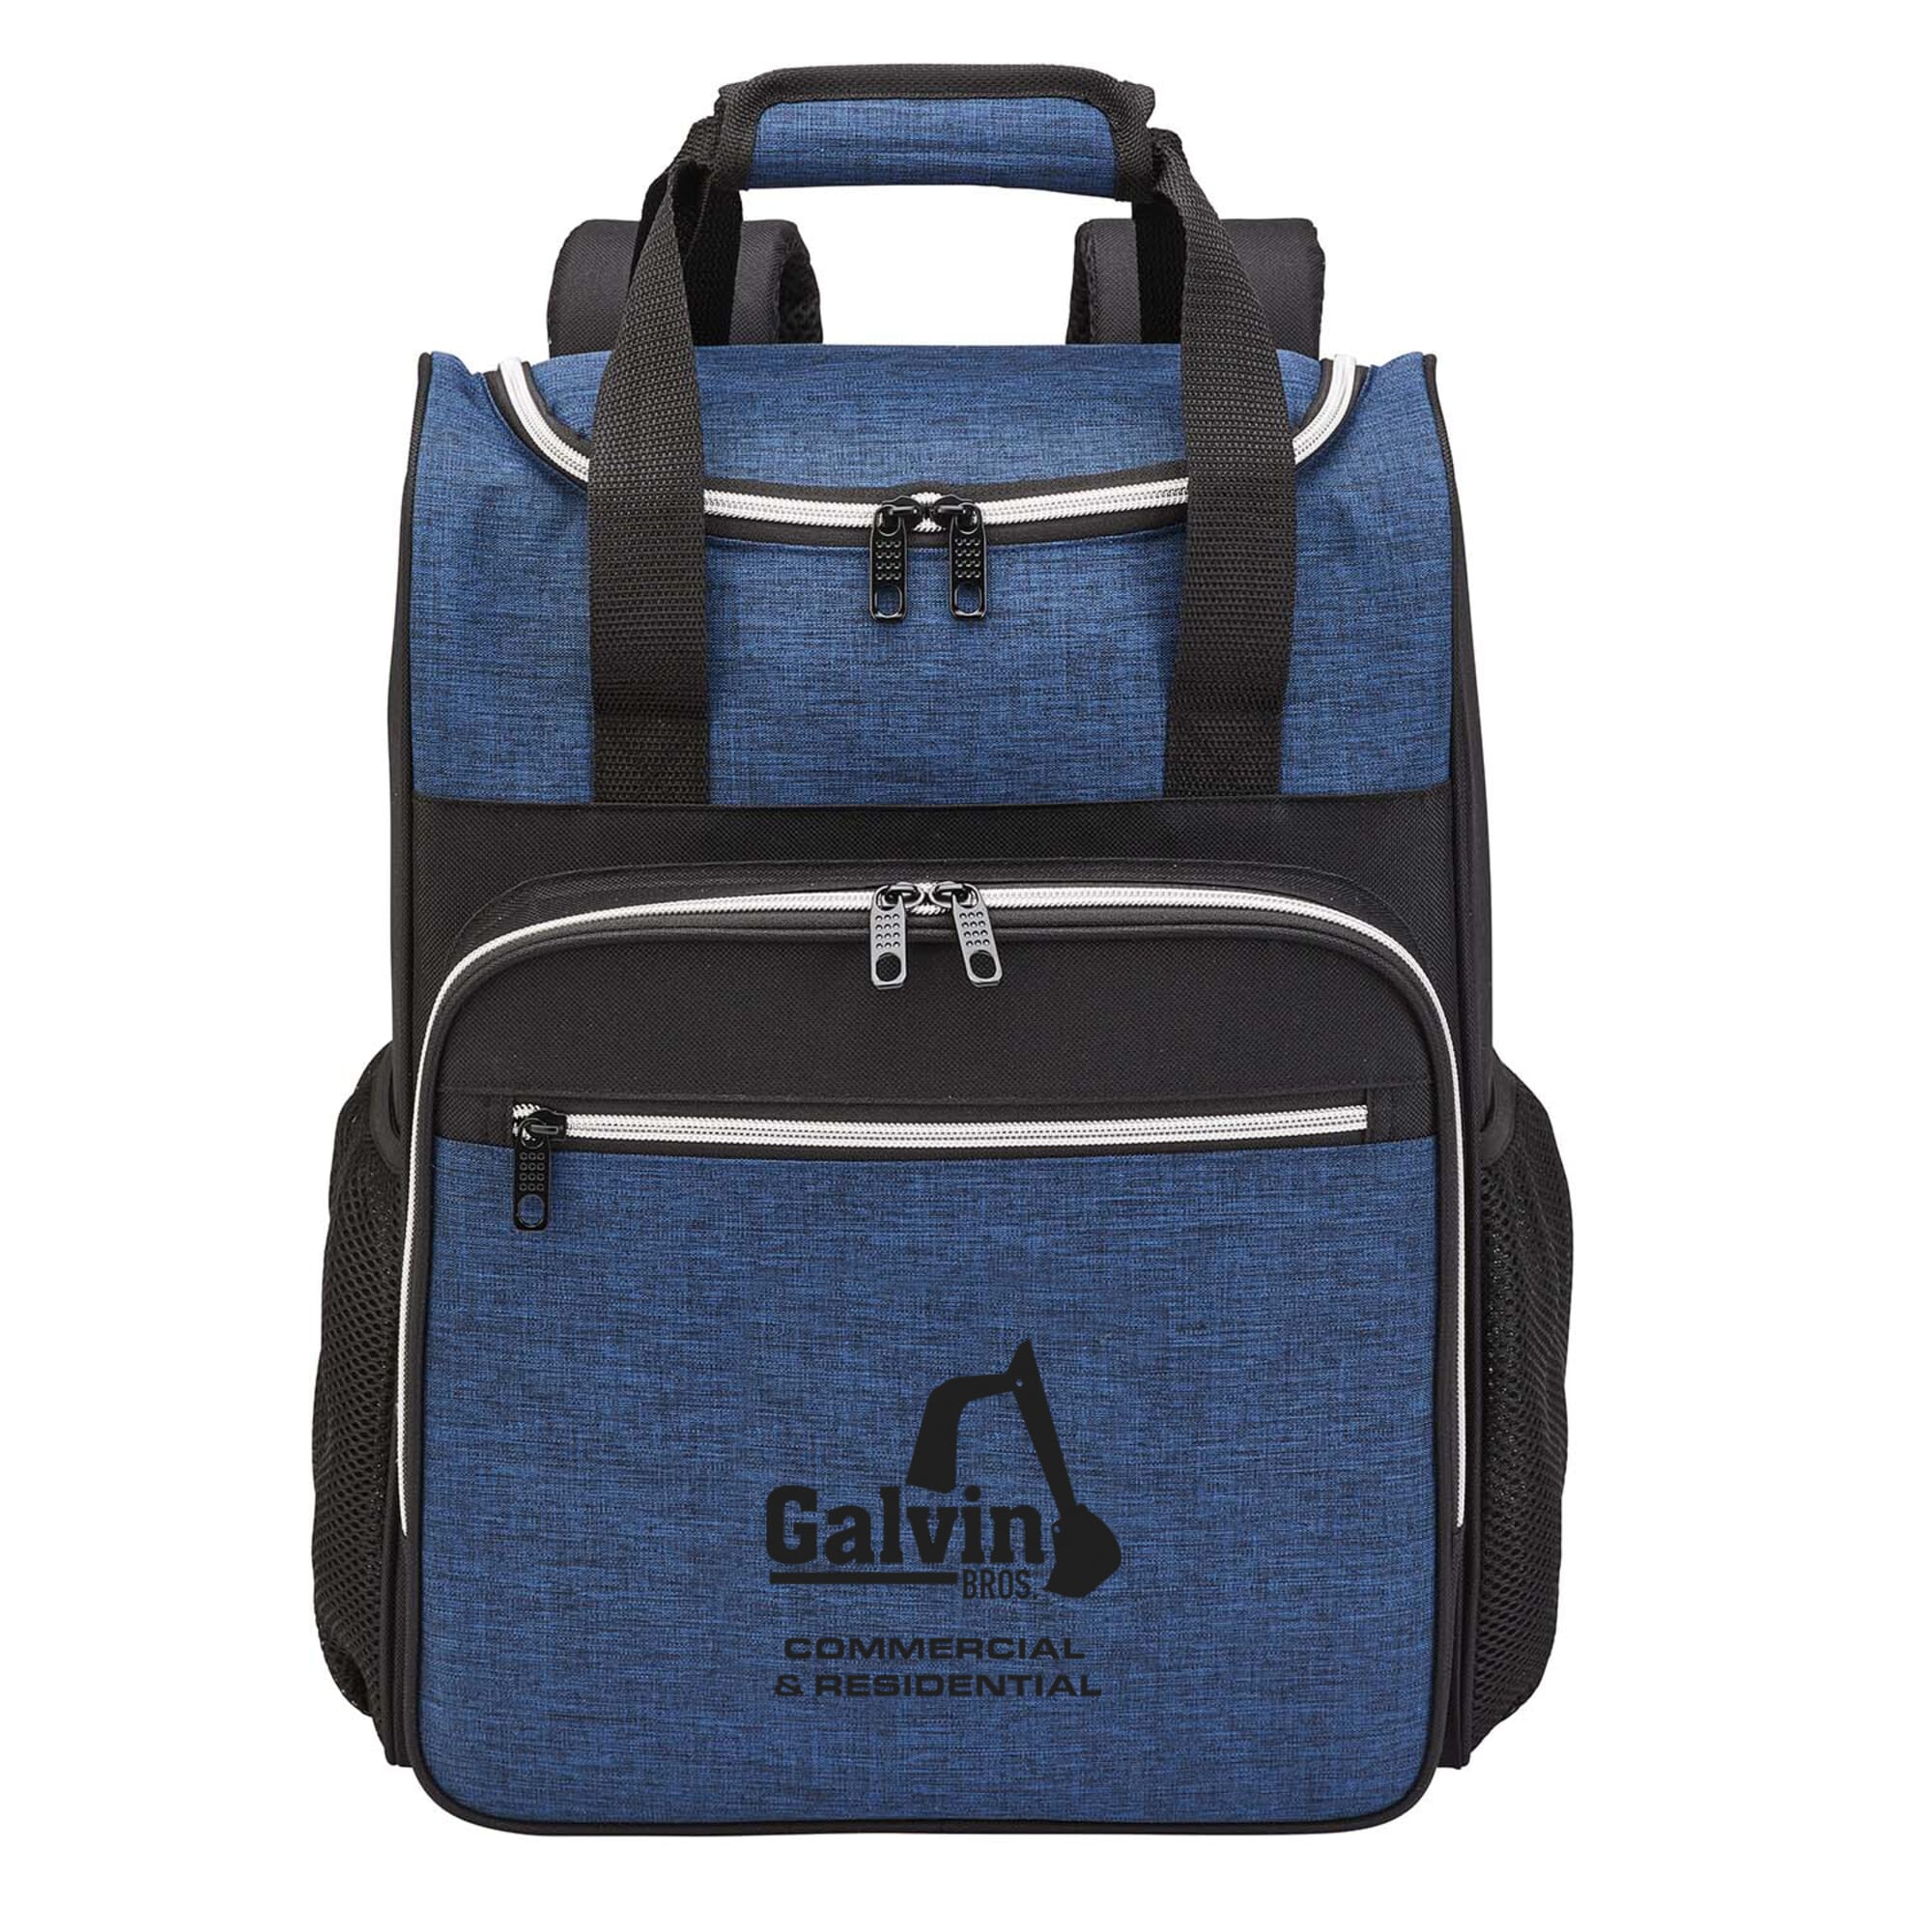 24-Can Heather Backpack Cooler 